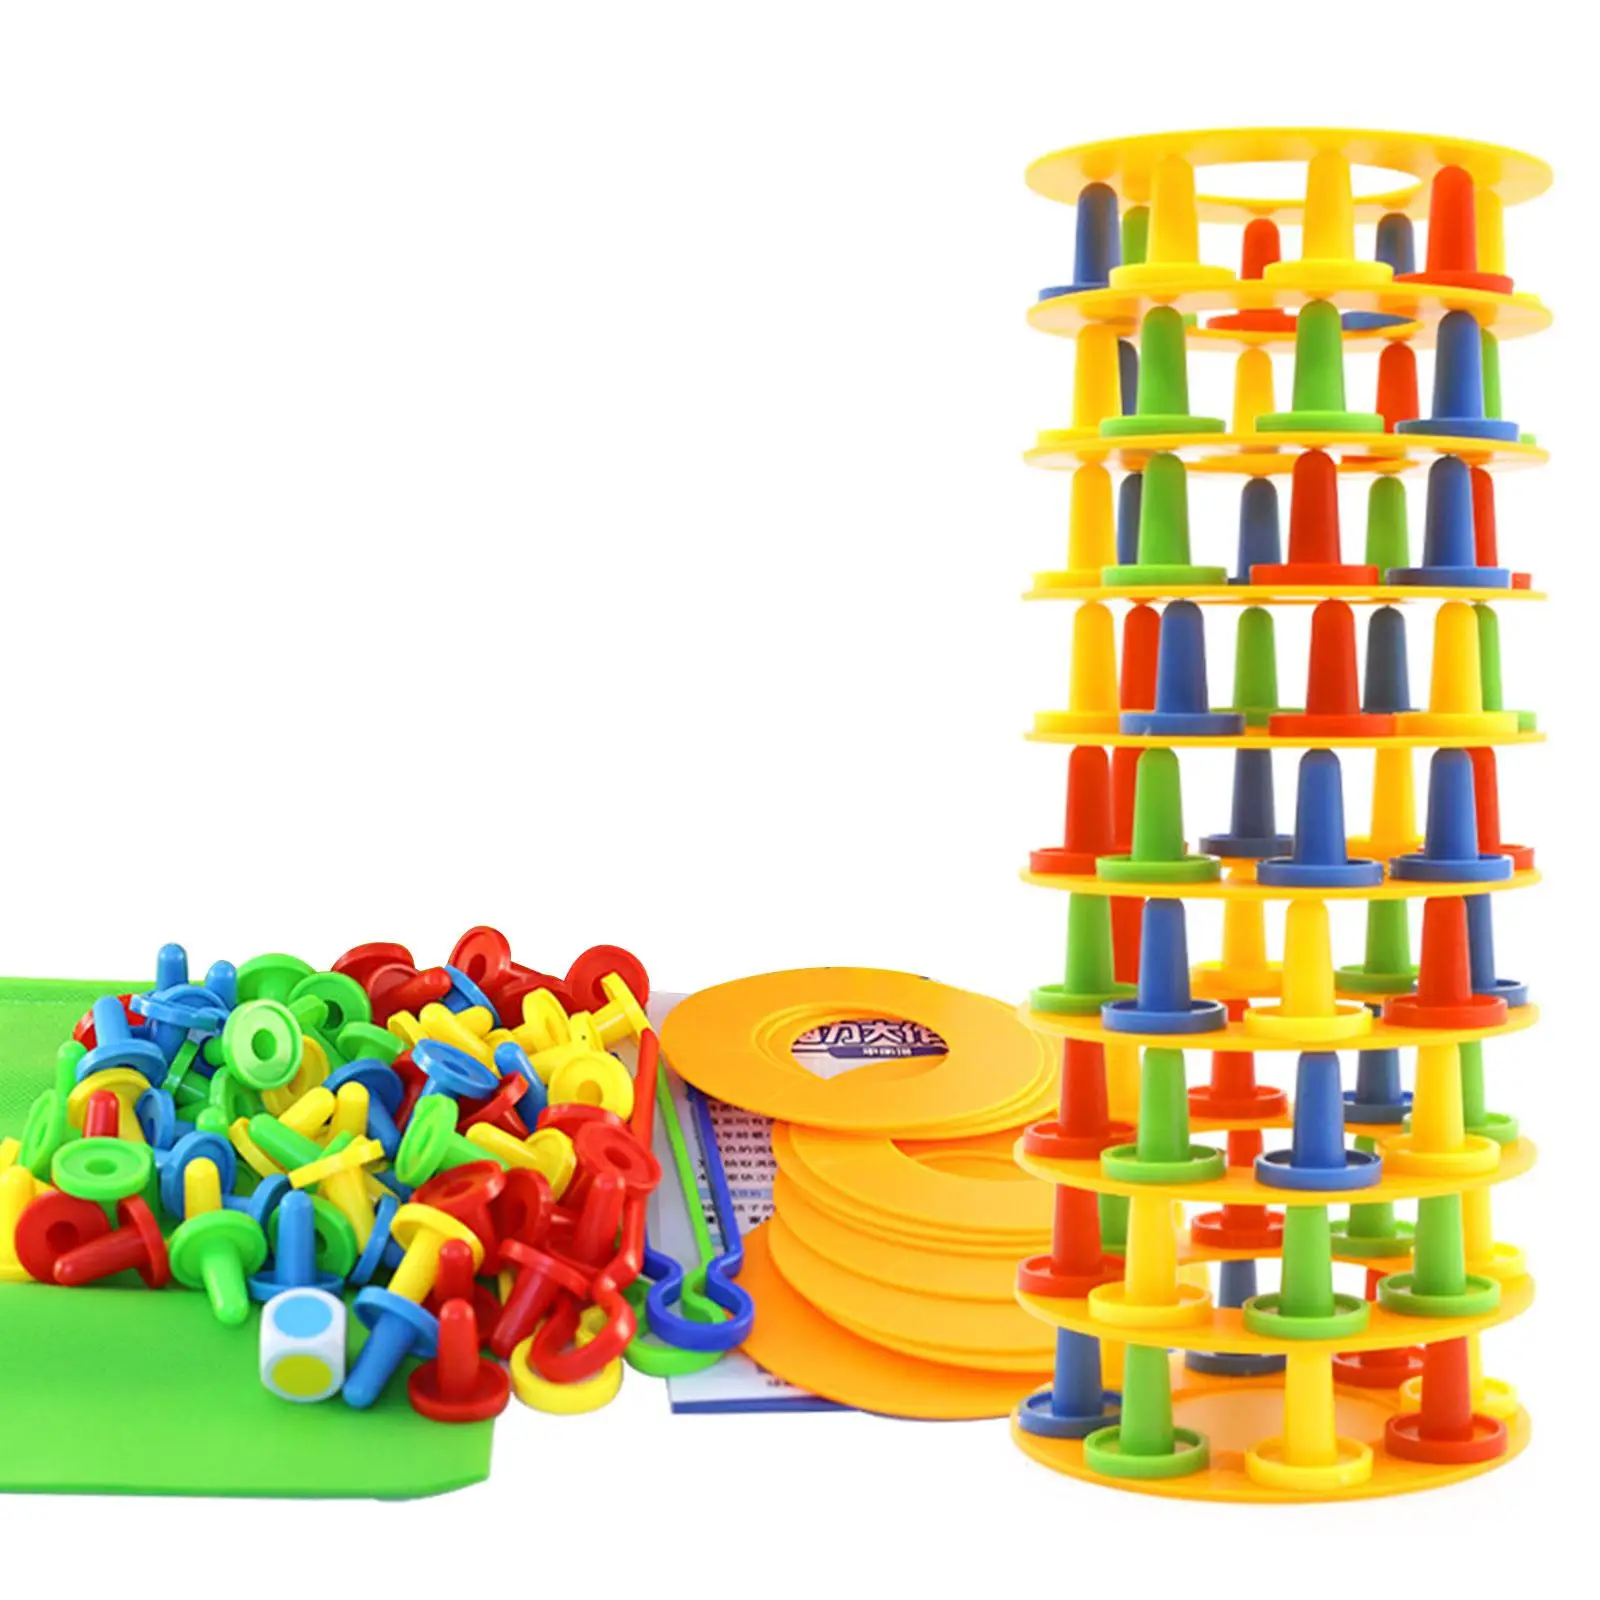 Balance Stacking Blocks Game for Kids Adults Fine Motor Skills Educational 2 Players for Family Travel Parties Home Girls Boys